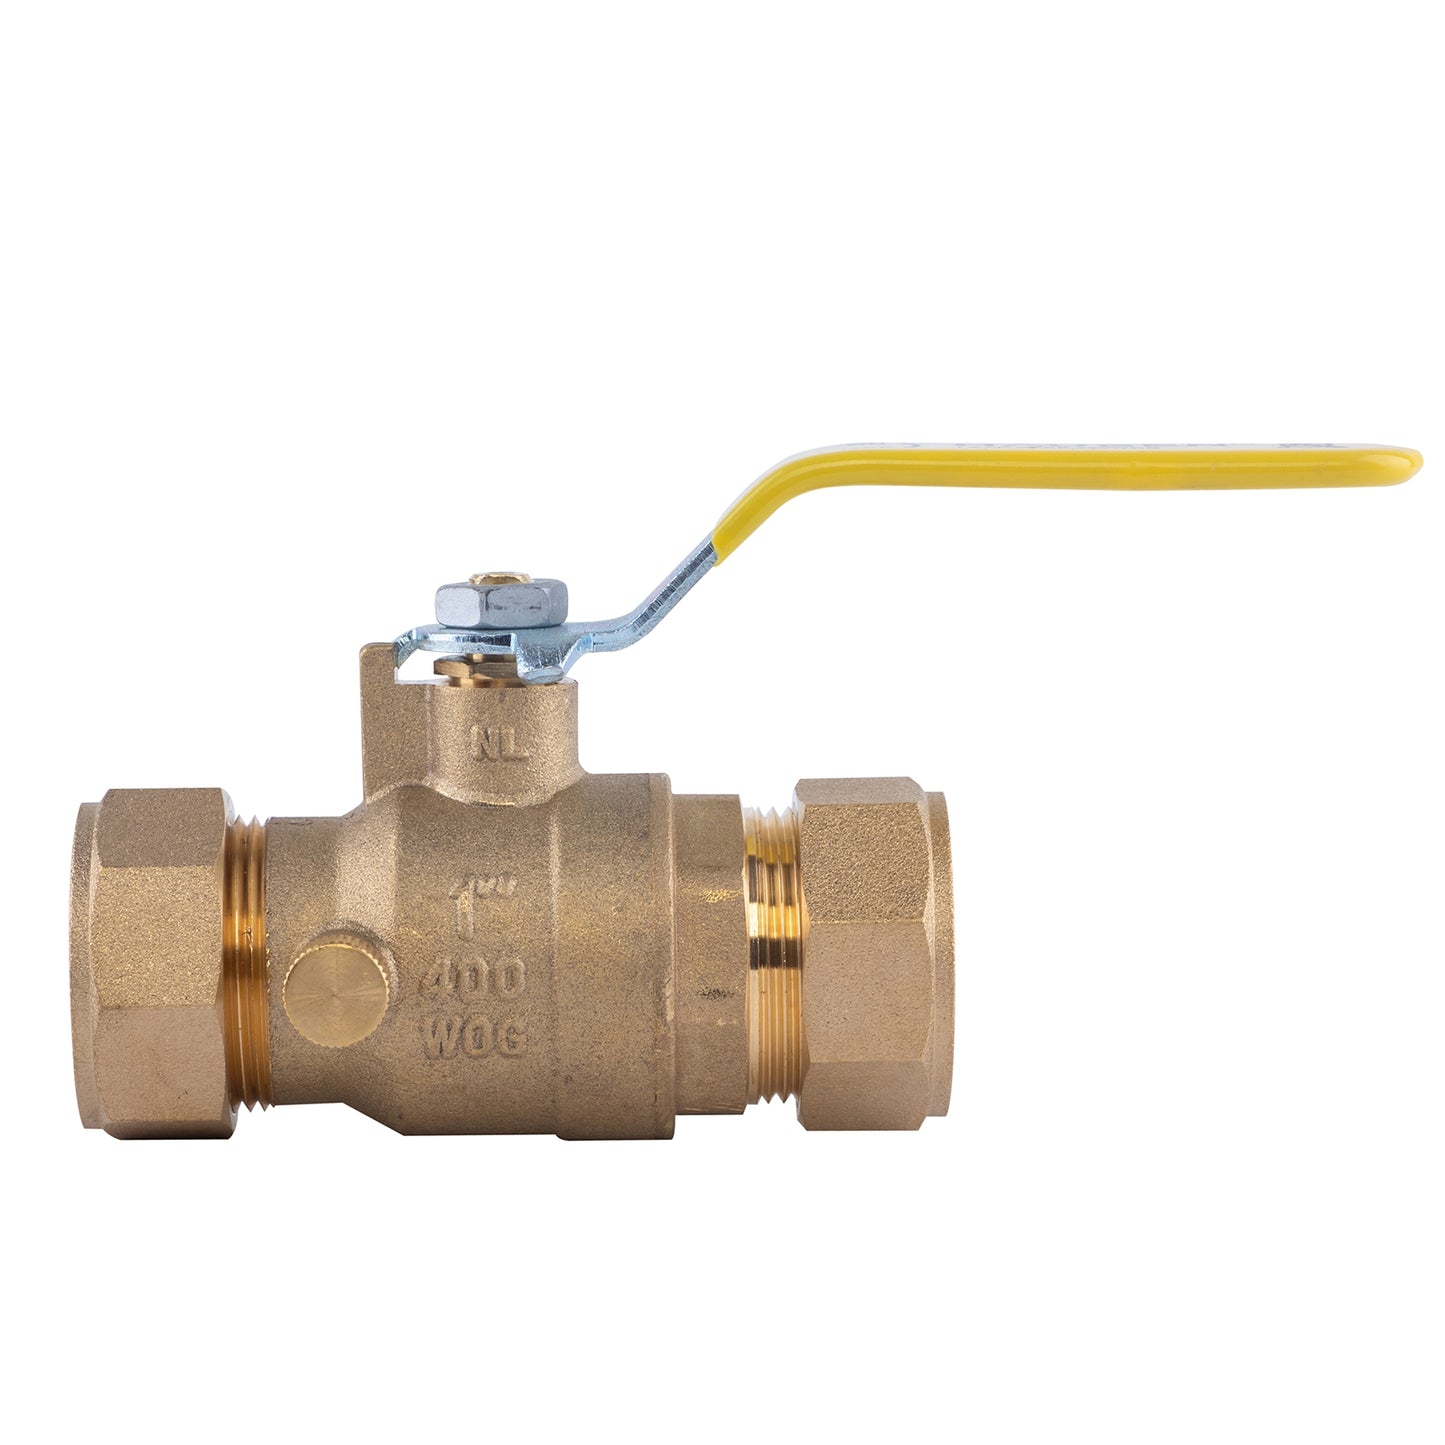 Hausen 1-inch Compression Standard Port Brass Ball Valve with Drain; Lead Free Forged Brass; Blowout Resistant Stem; For Use in Potable Water, Oil and Gas Distribution Systems, 5-Pack